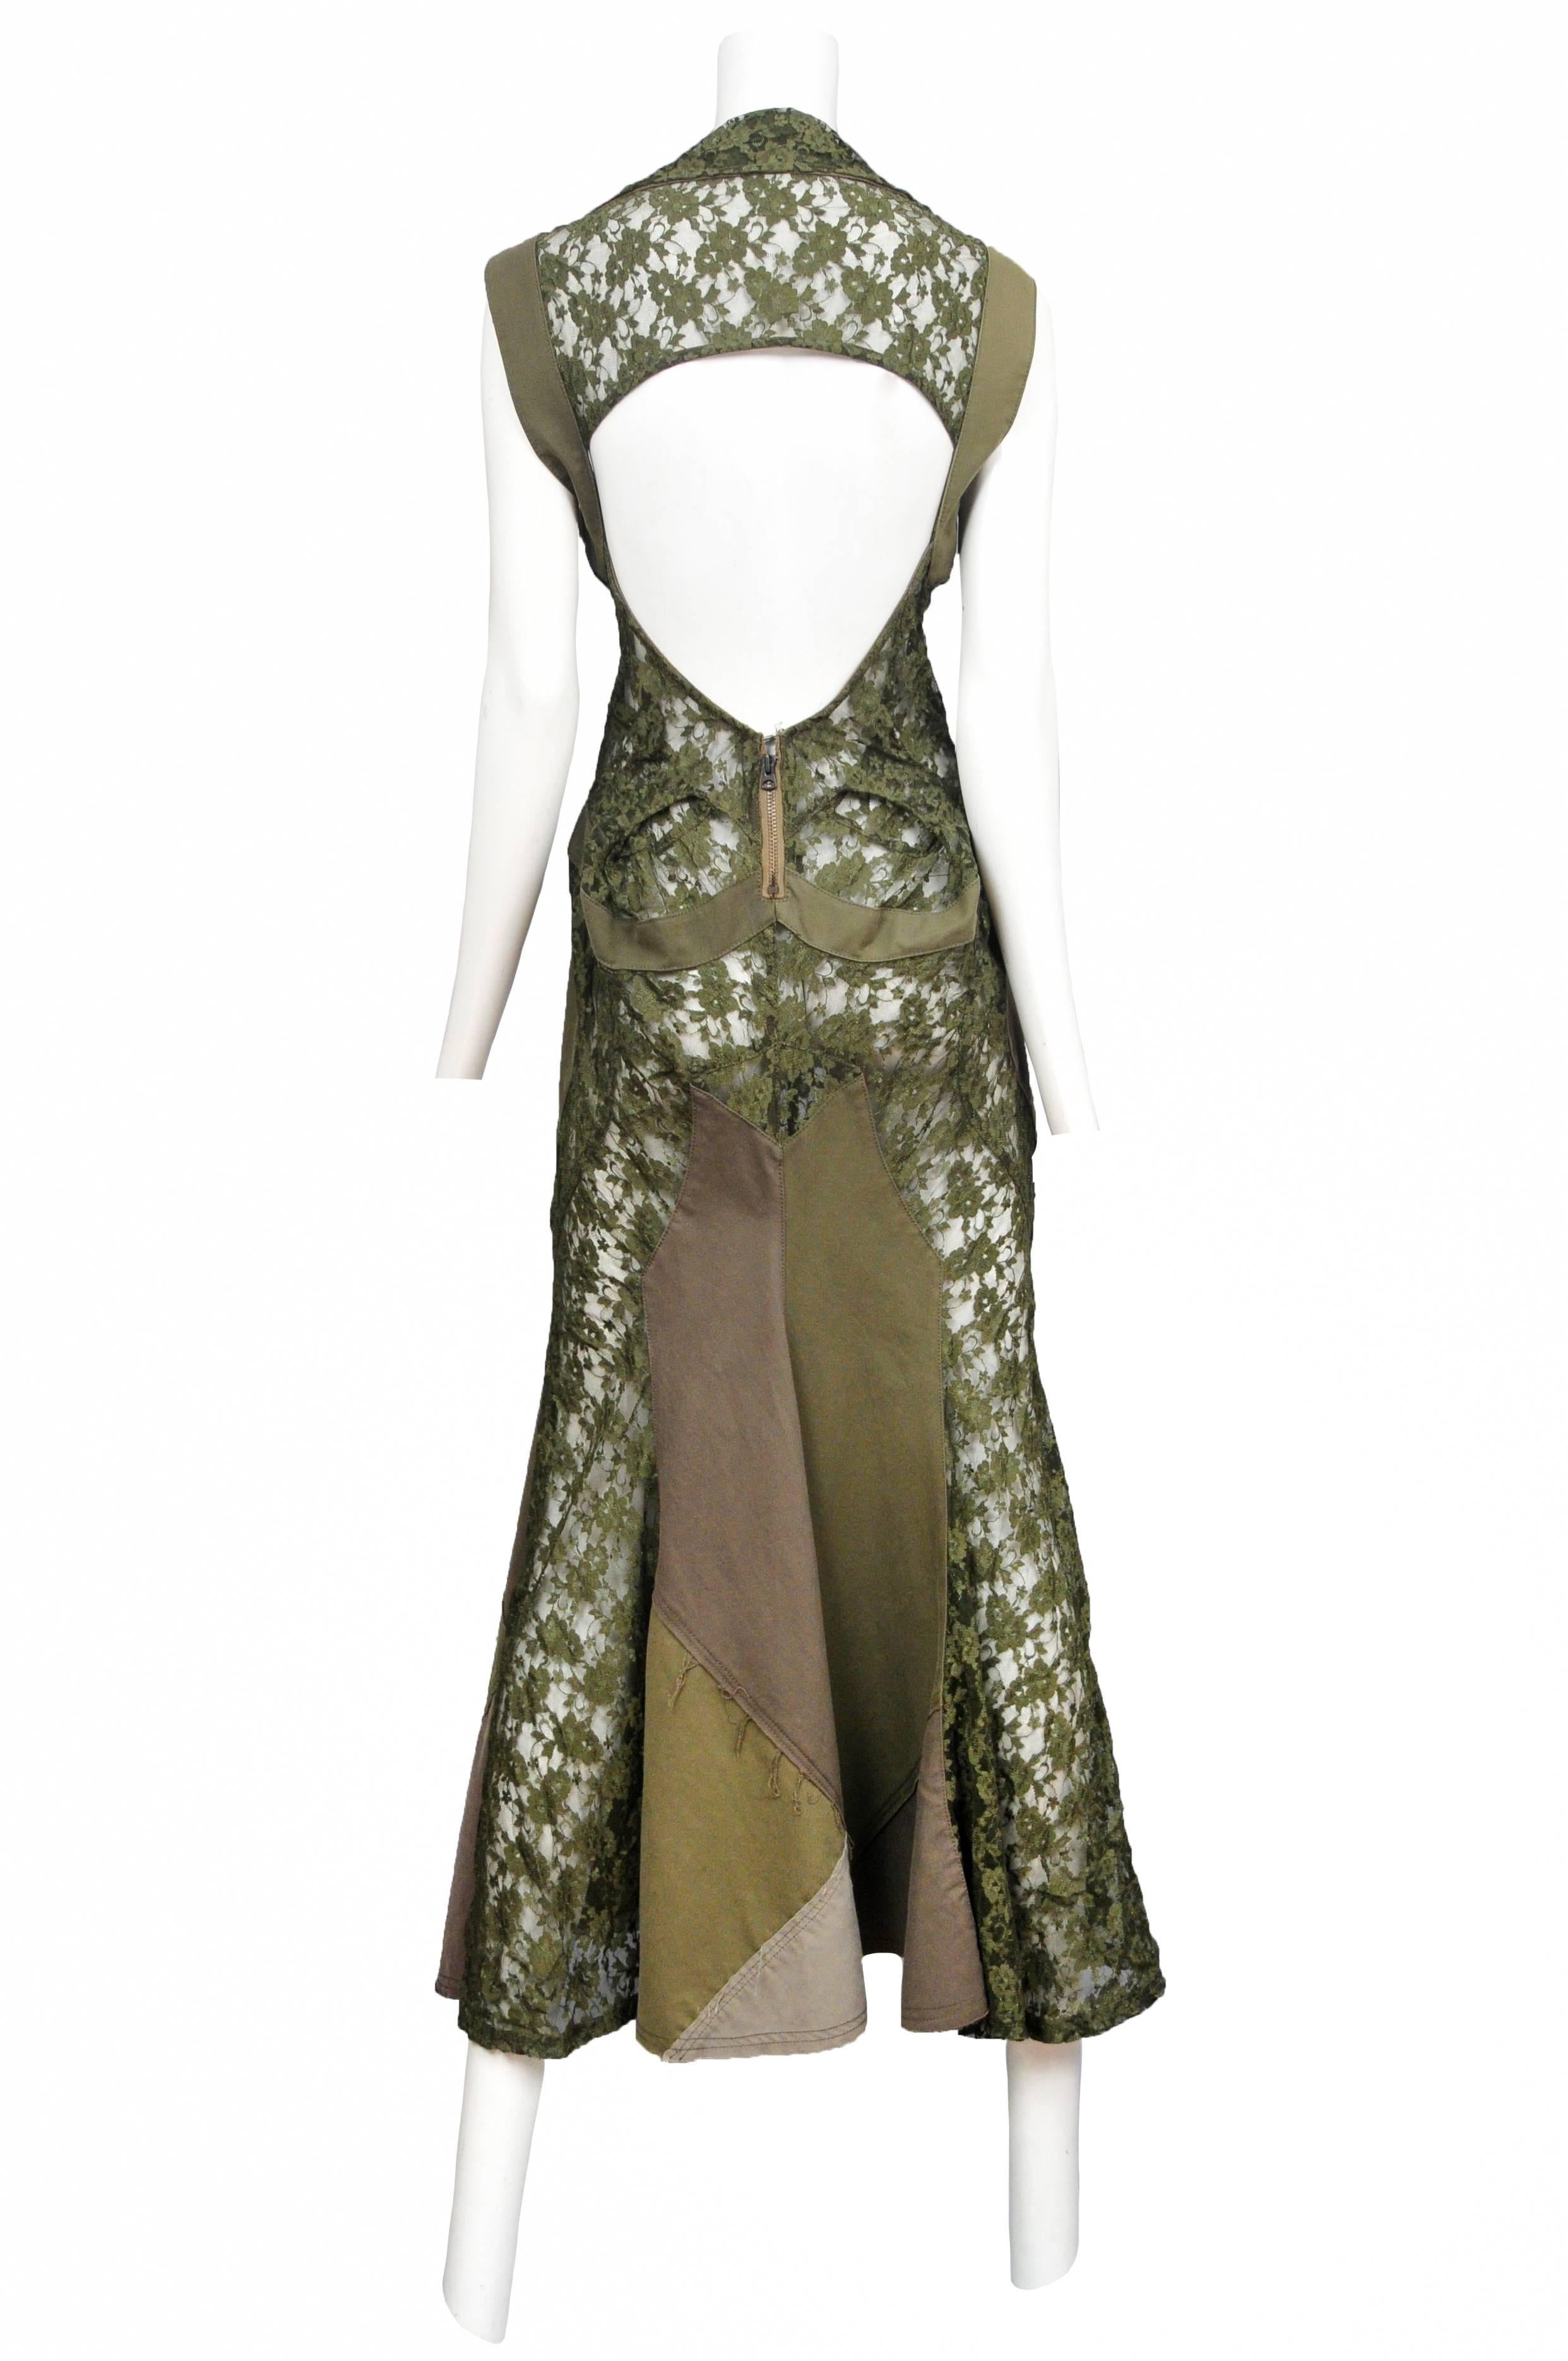 Vintage Junya Watanabe olive military lace open back maxi gown featuring panels of various shades of army green interspersed with olive green lace. From the Fall / Winter 2006 Collection.